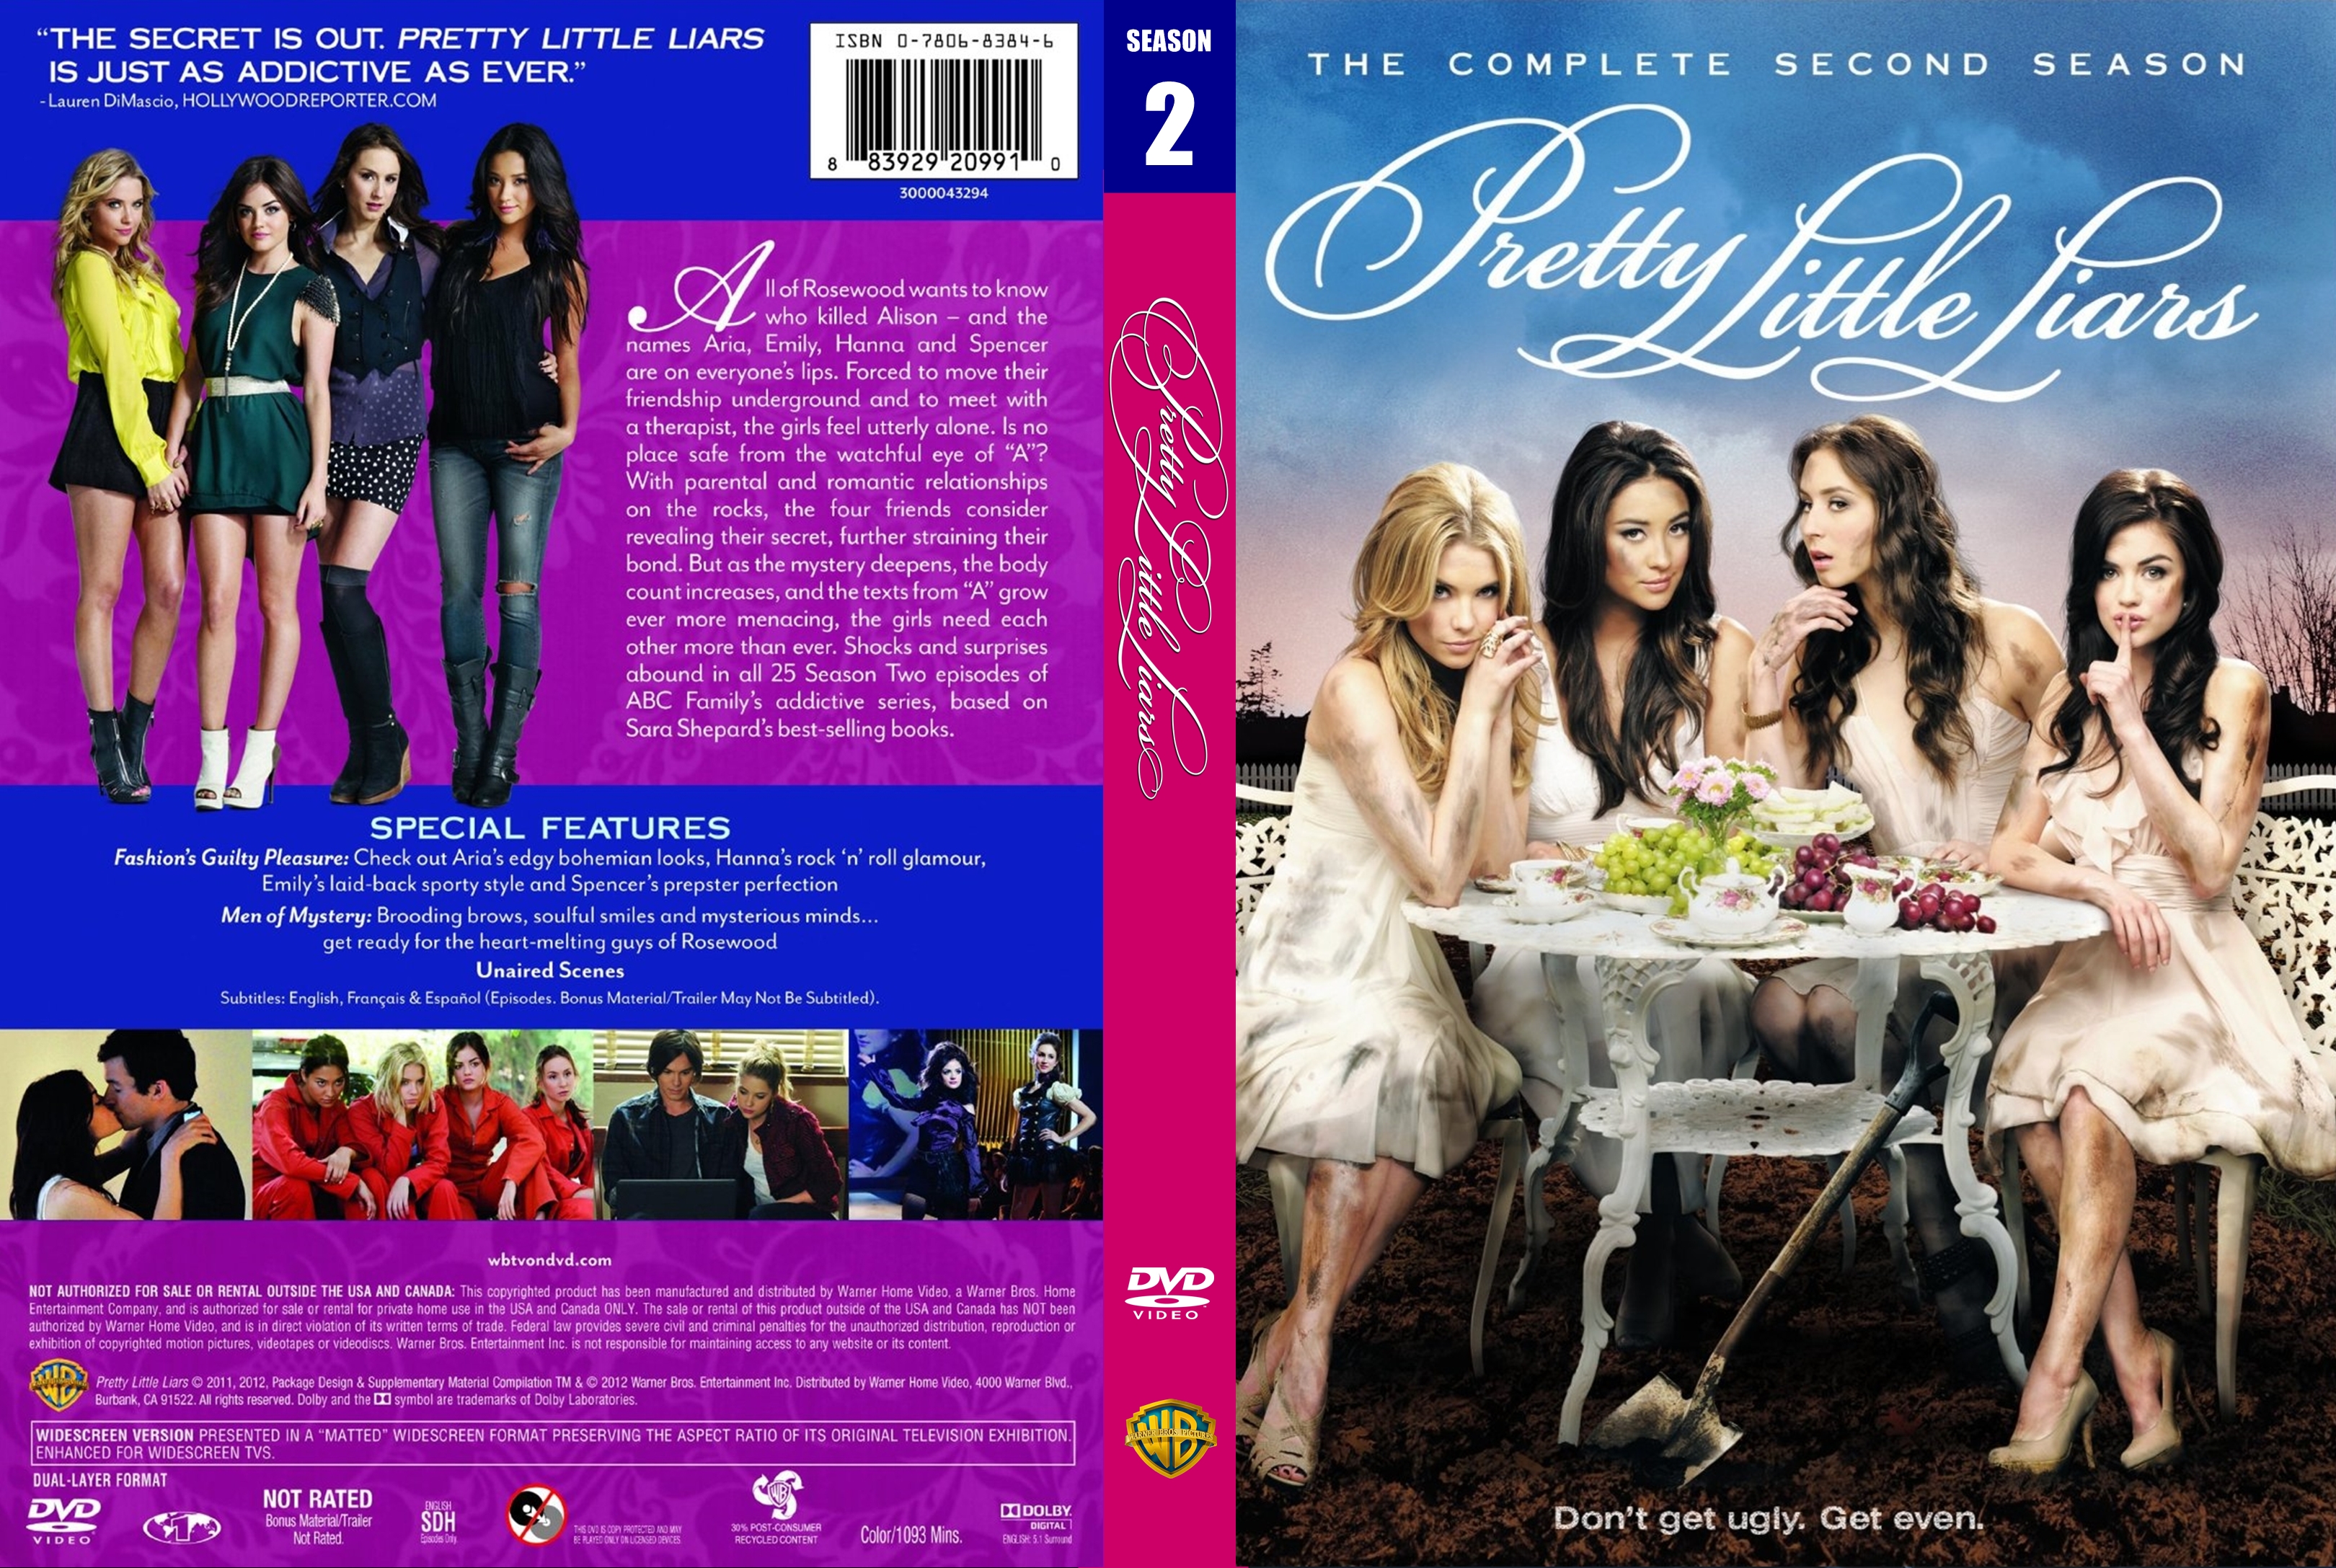 Pretty Little Liars S02 Dvd Covers Cover Century Over